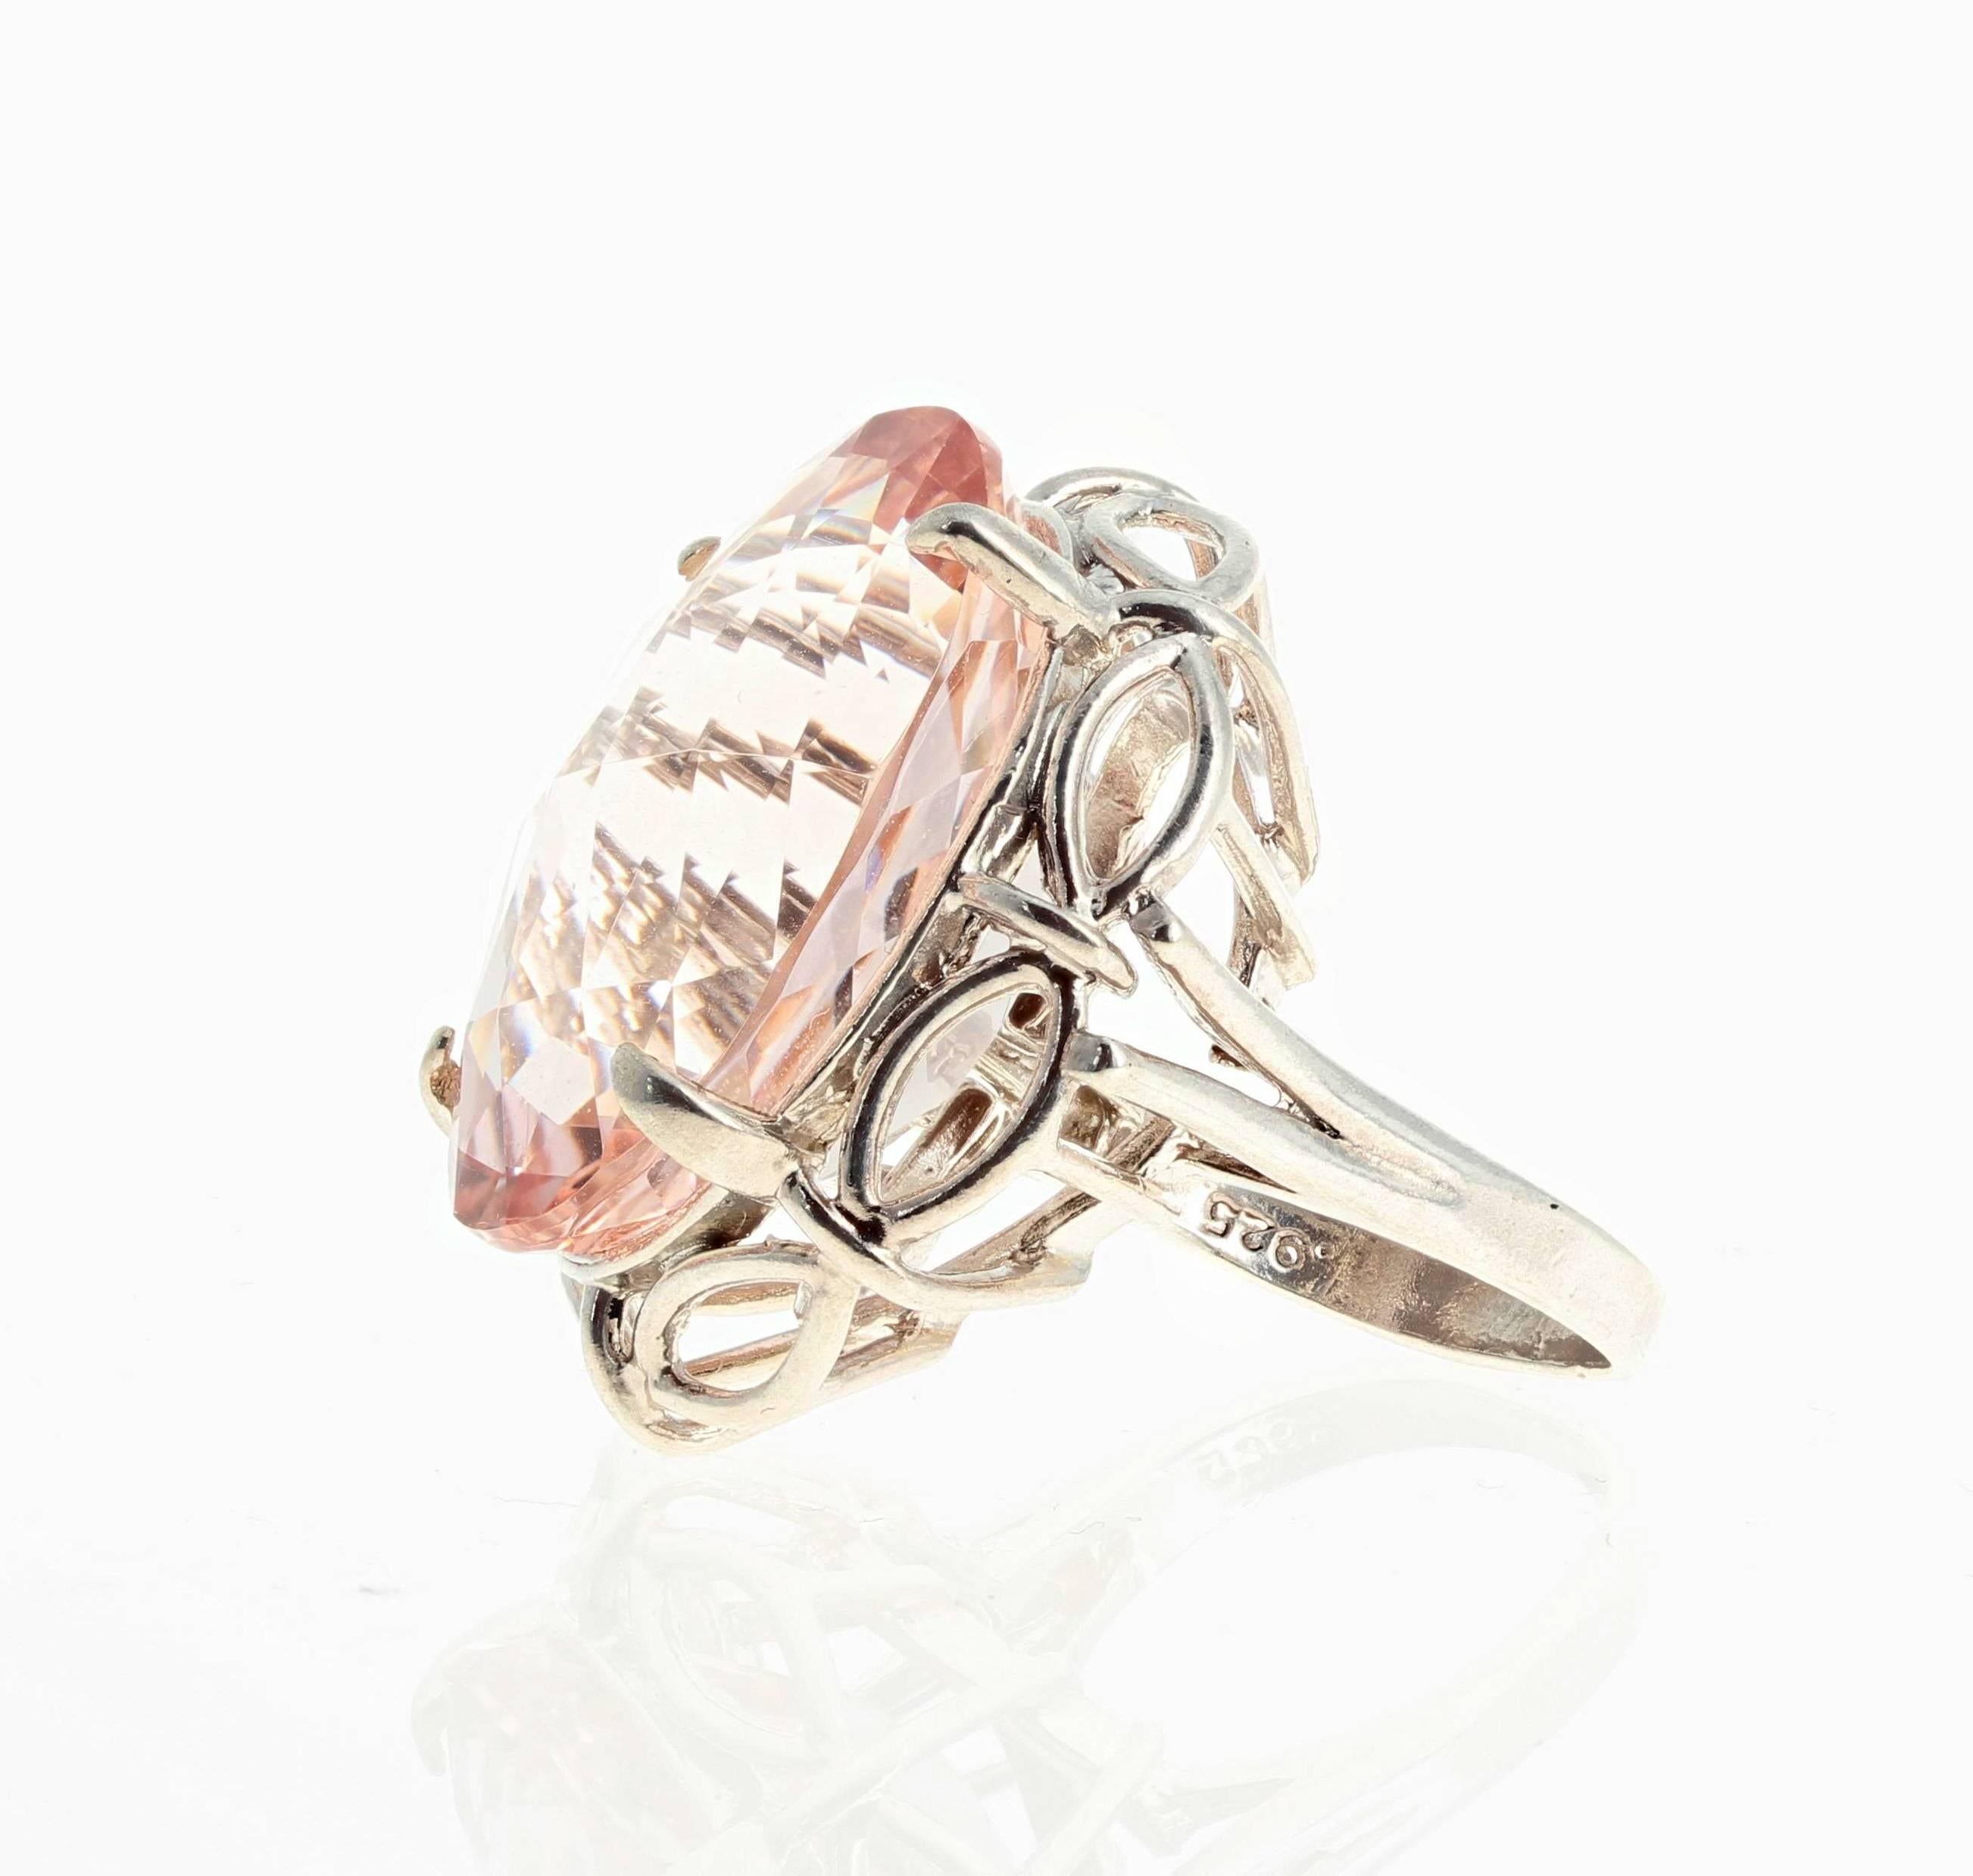 Oval Cut AJD Enormous Glowing Clear 30 Ct. Morganite Sterling Silver Cocktail Ring For Sale